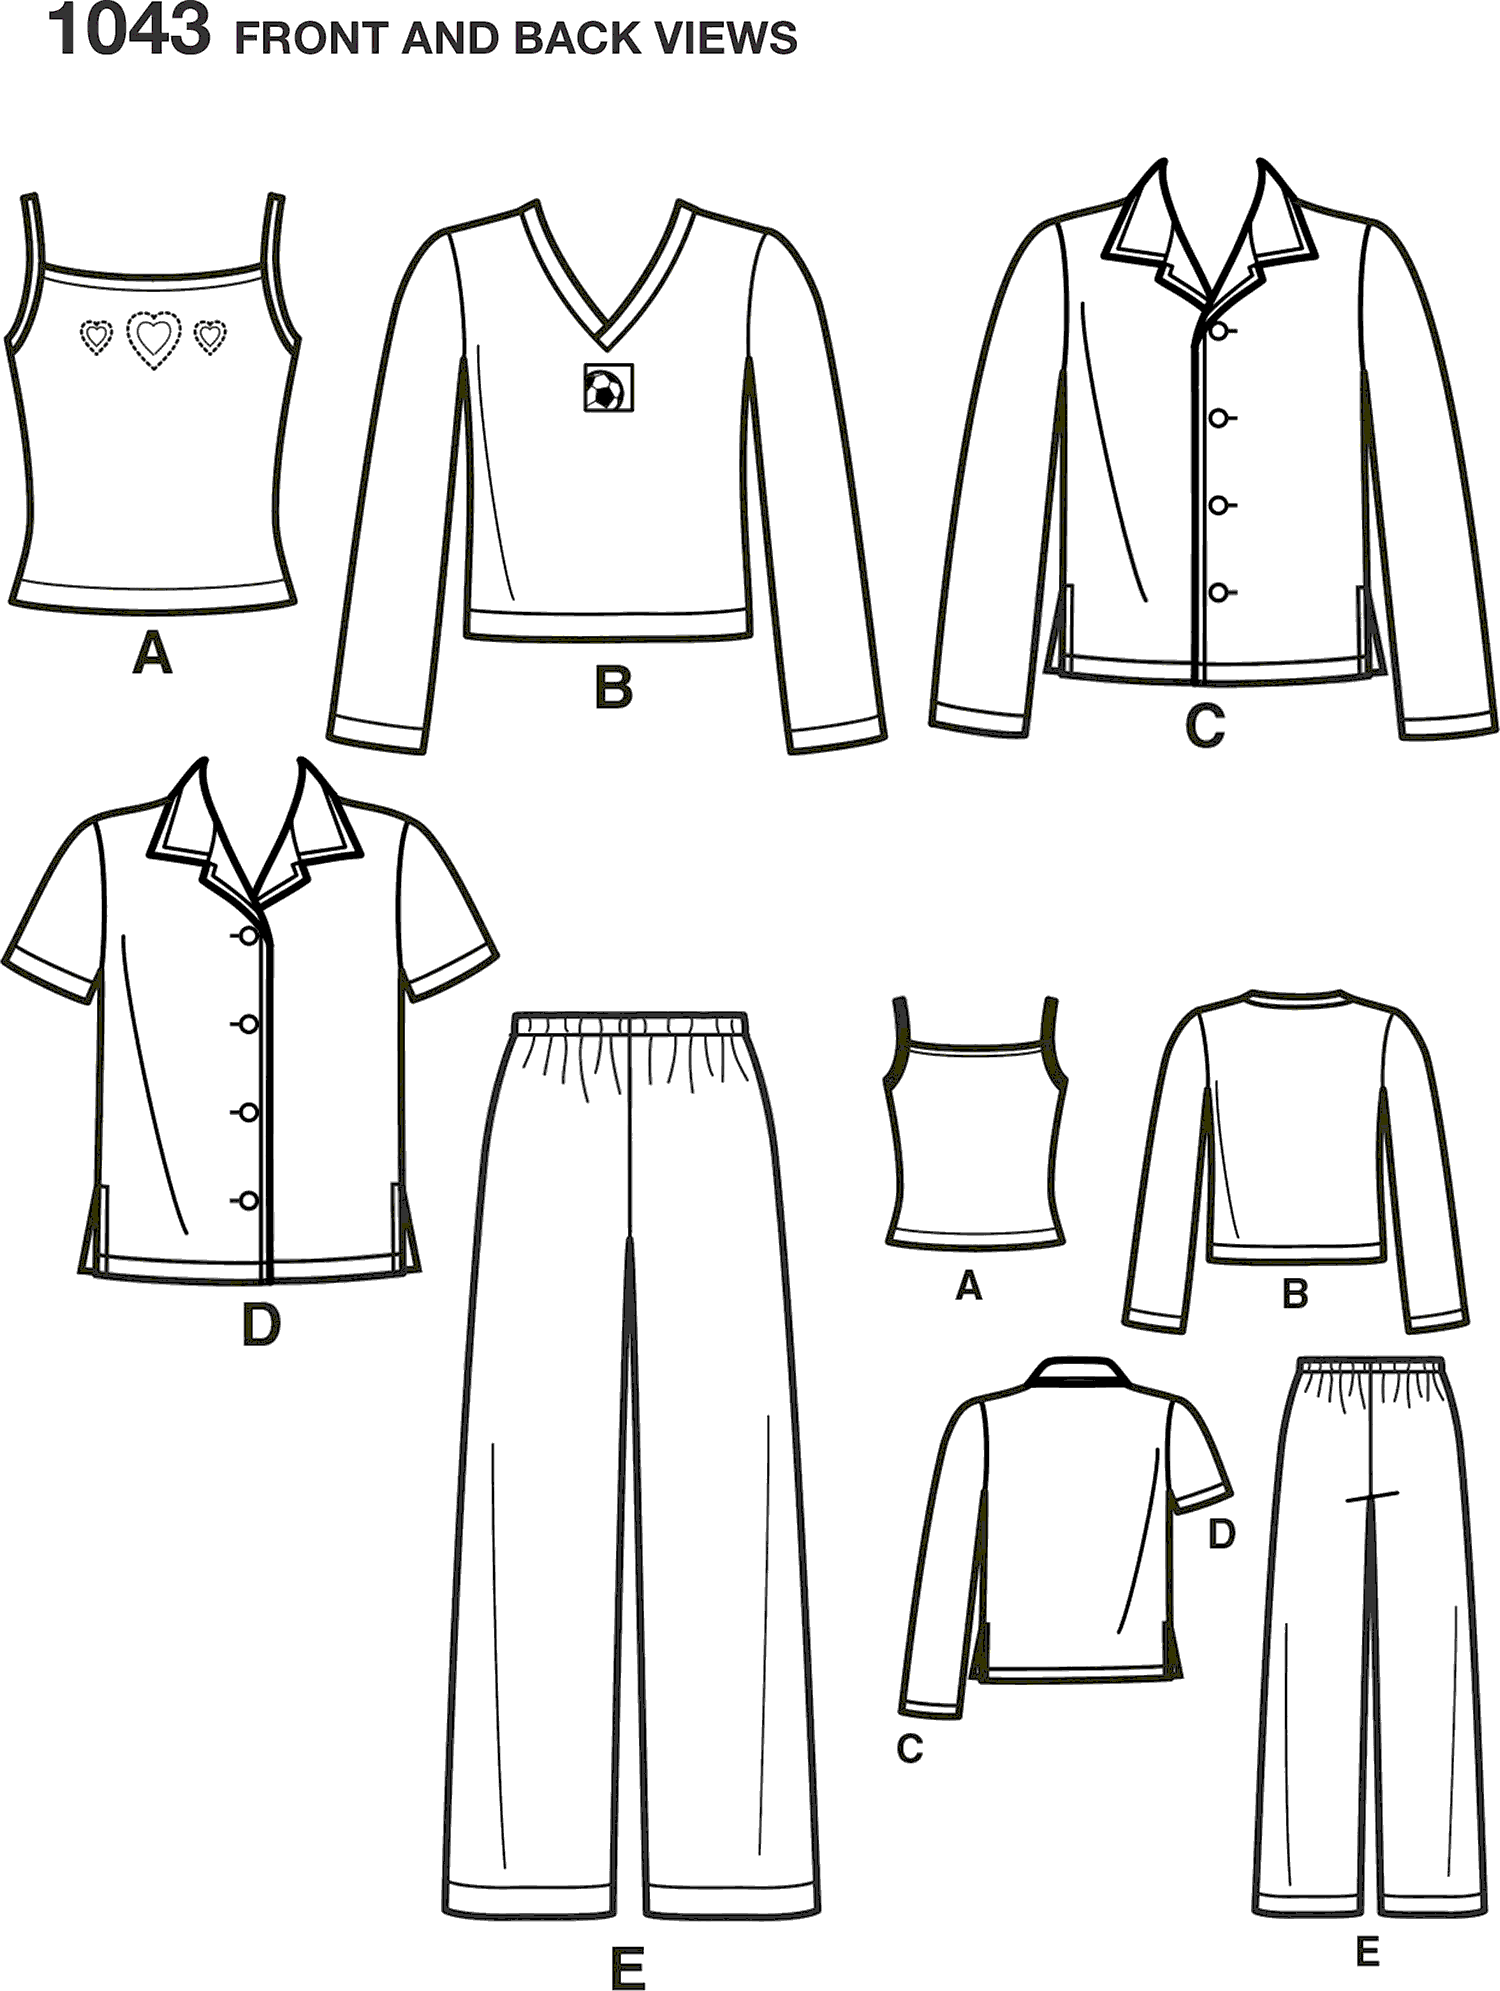 Simplicity Pattern 1043 Childs Girls and Boys Separates Line Art From Patternsandplains.com